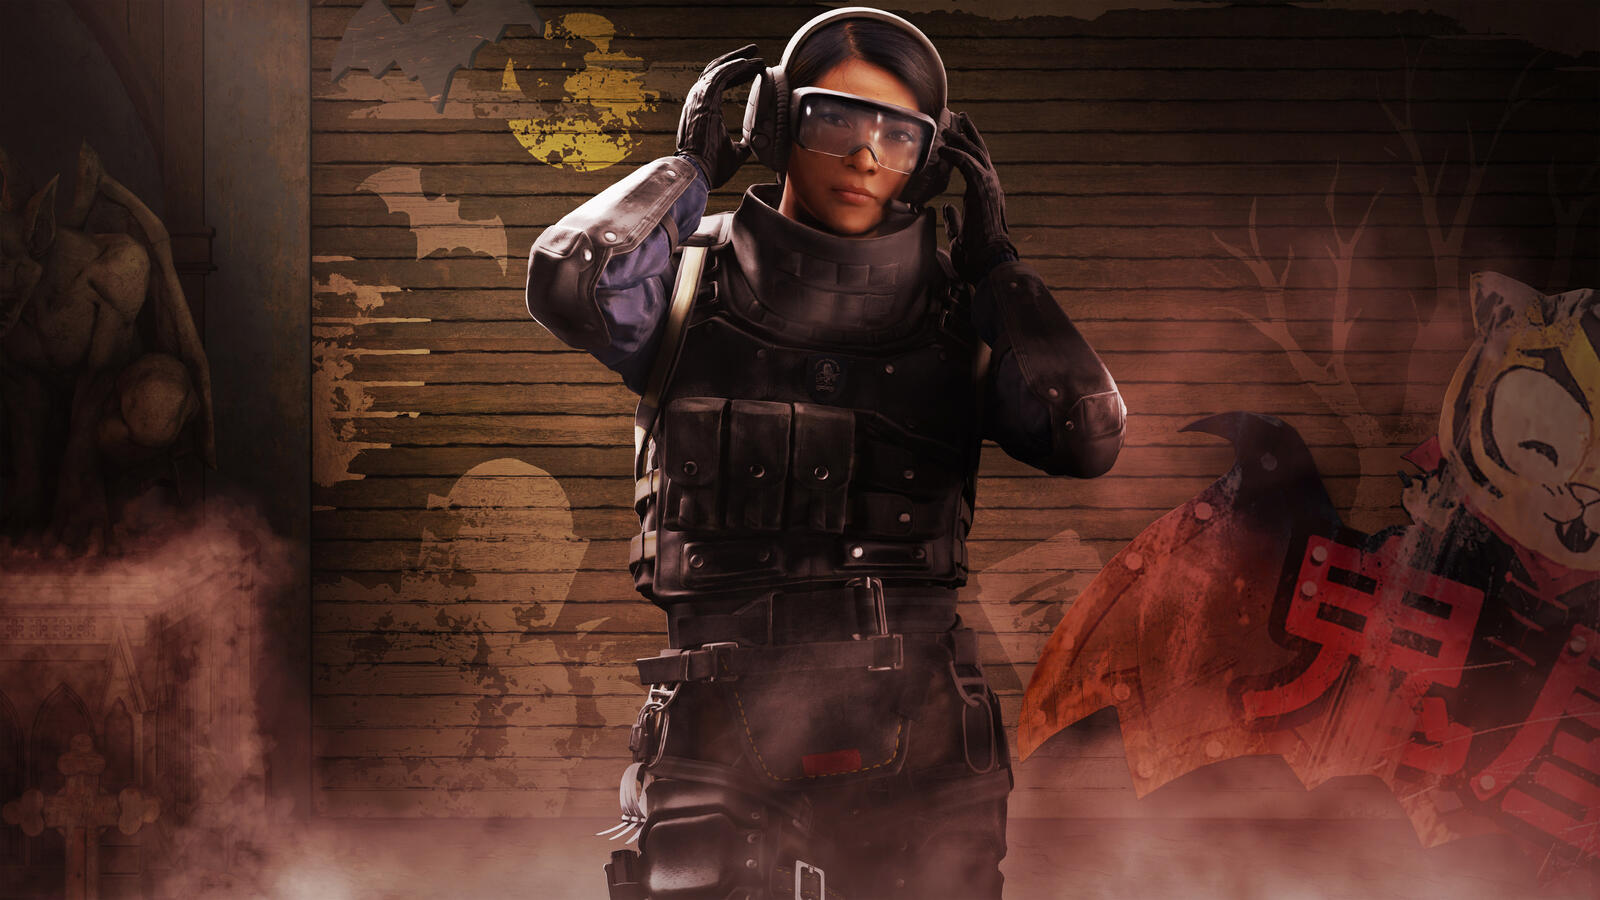 Wallpapers Tom Clancys Rainbow Six Siege girl computer games on the desktop